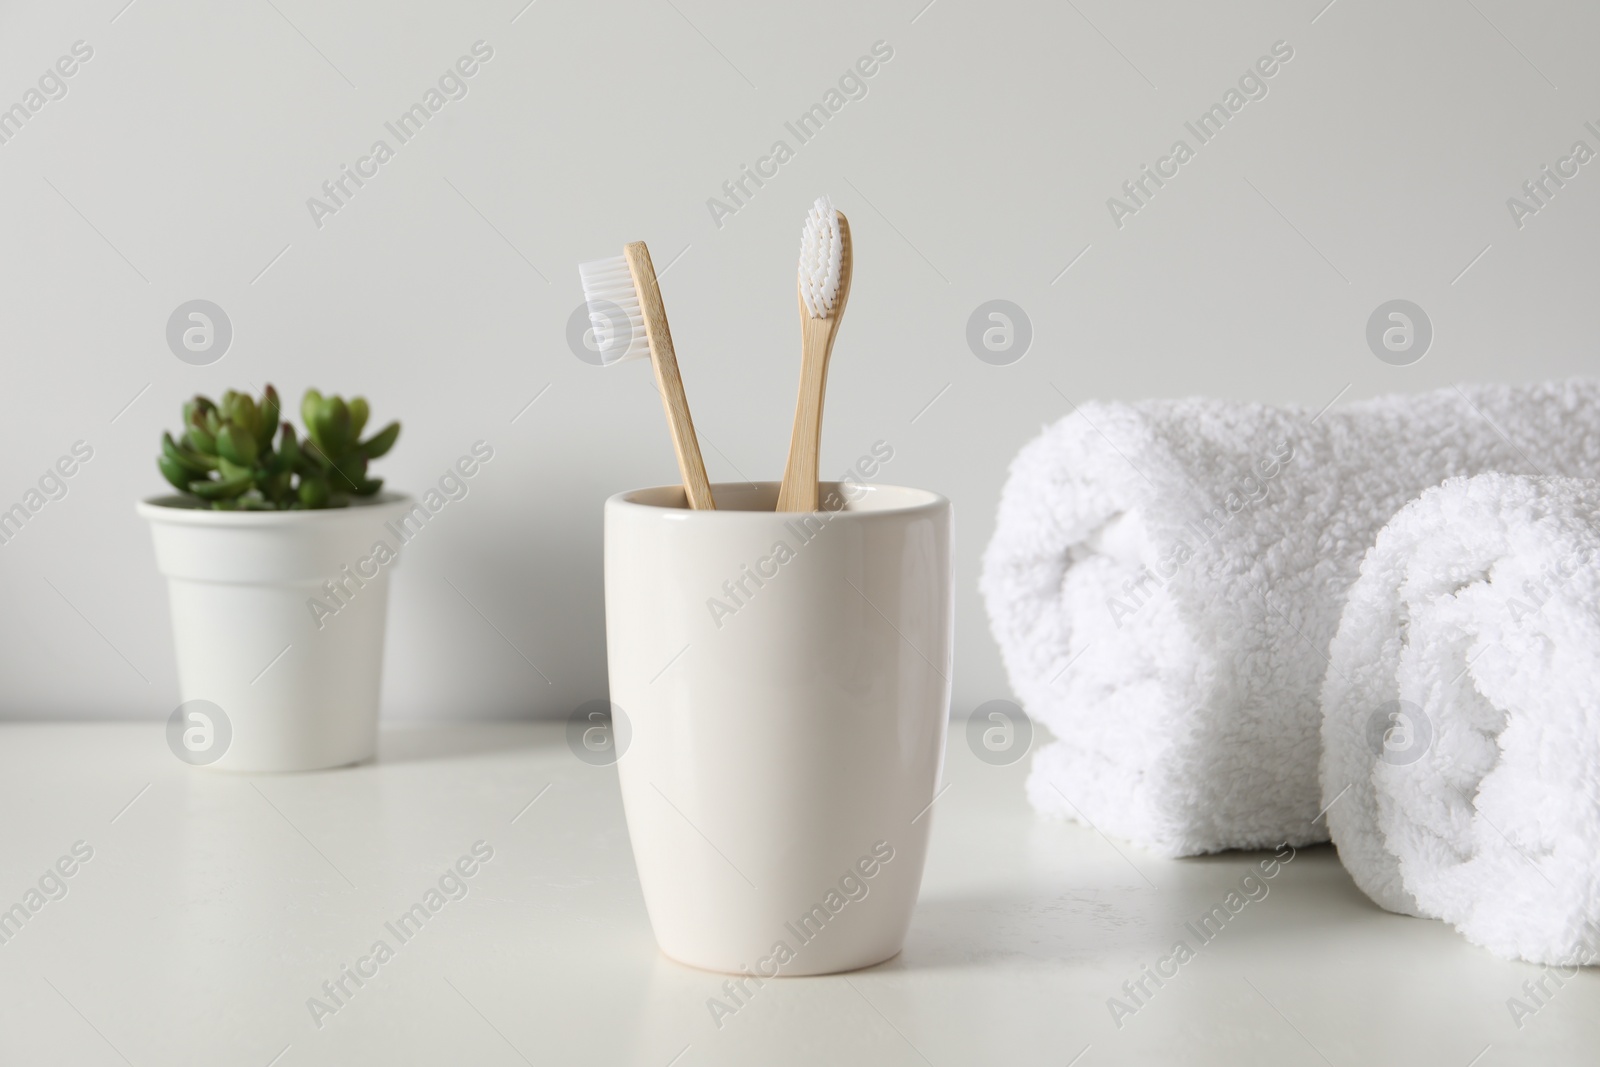 Photo of Bamboo toothbrushes in holder, potted plant and towels on white countertop